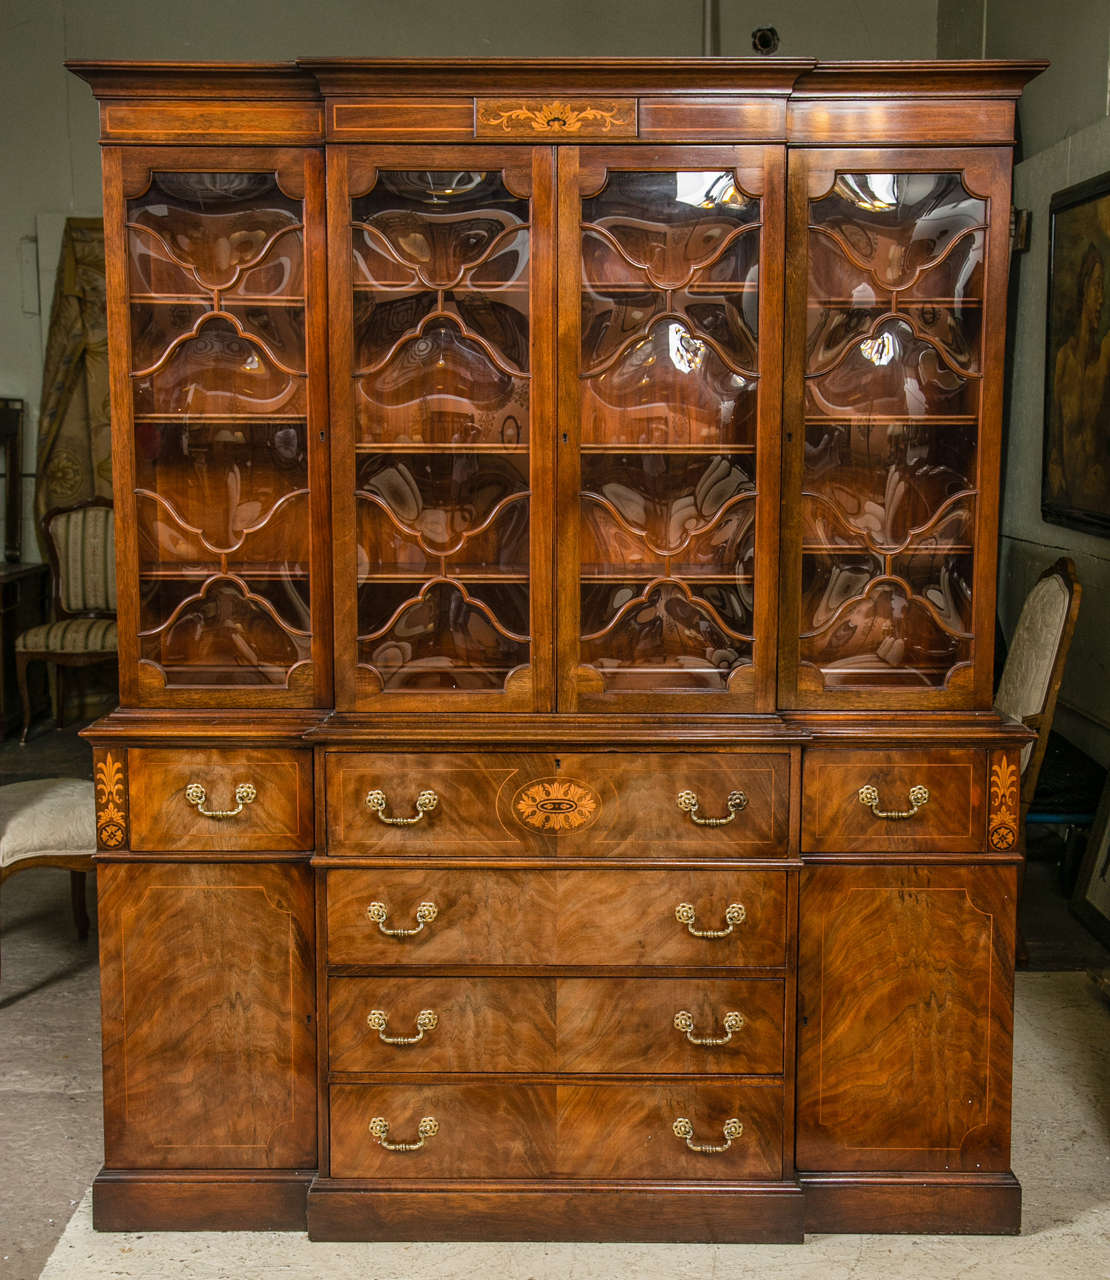 A stunning crotch mahogany breakfront bookcase. The block front case having four center drawers, the top converting to a pull down writing area with desk compartment, flanked by two large doors. The top corners and center drawer with a fine